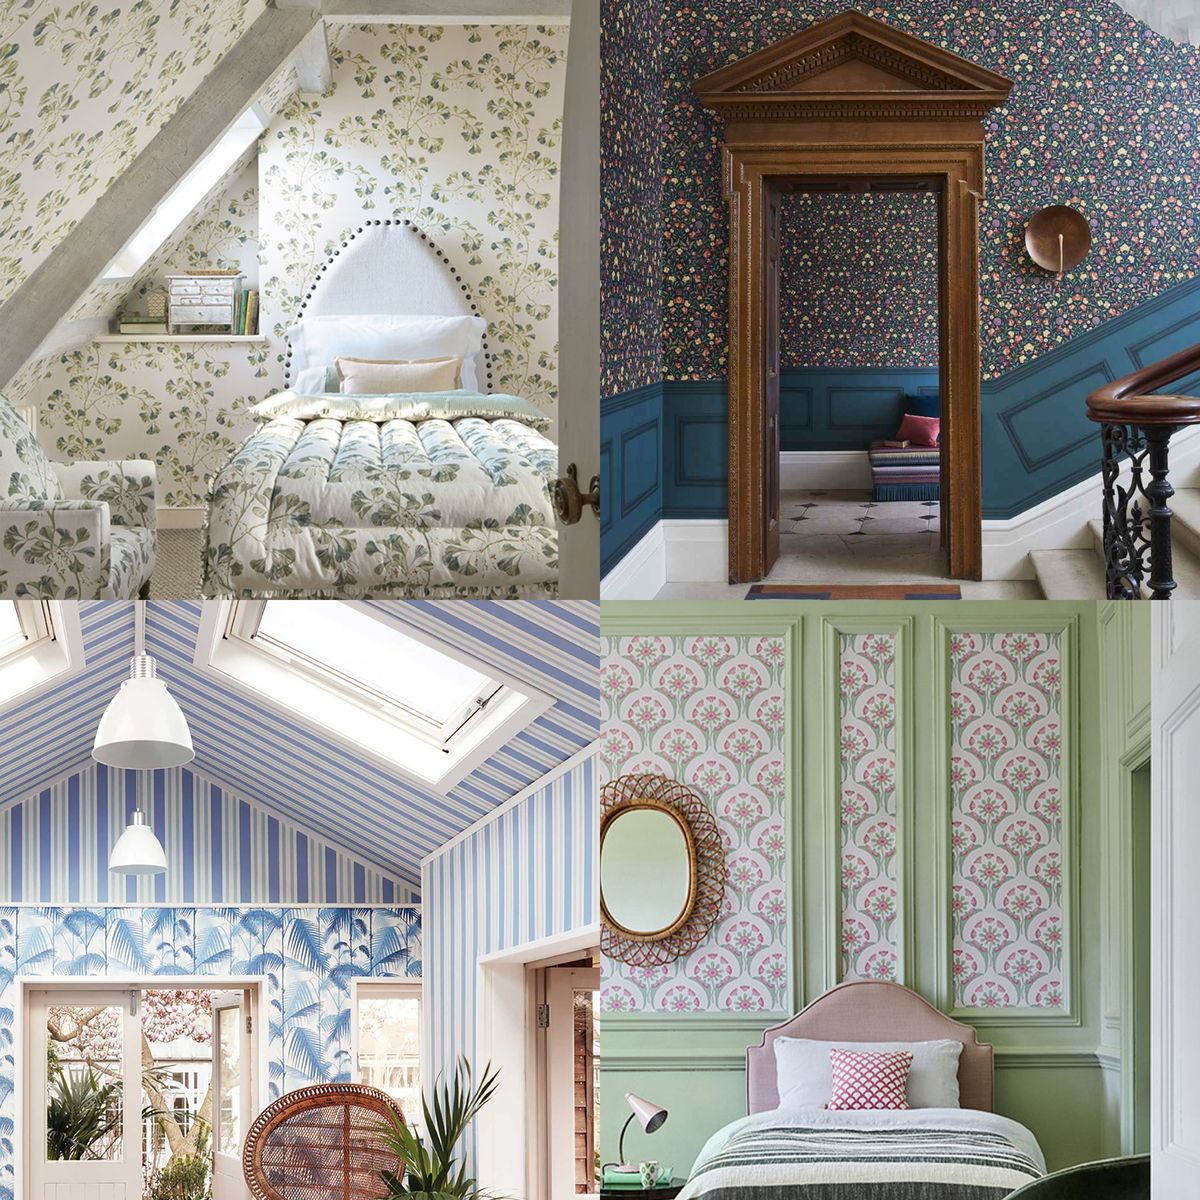 21 clever wallpaper ideas to inspire your next home update